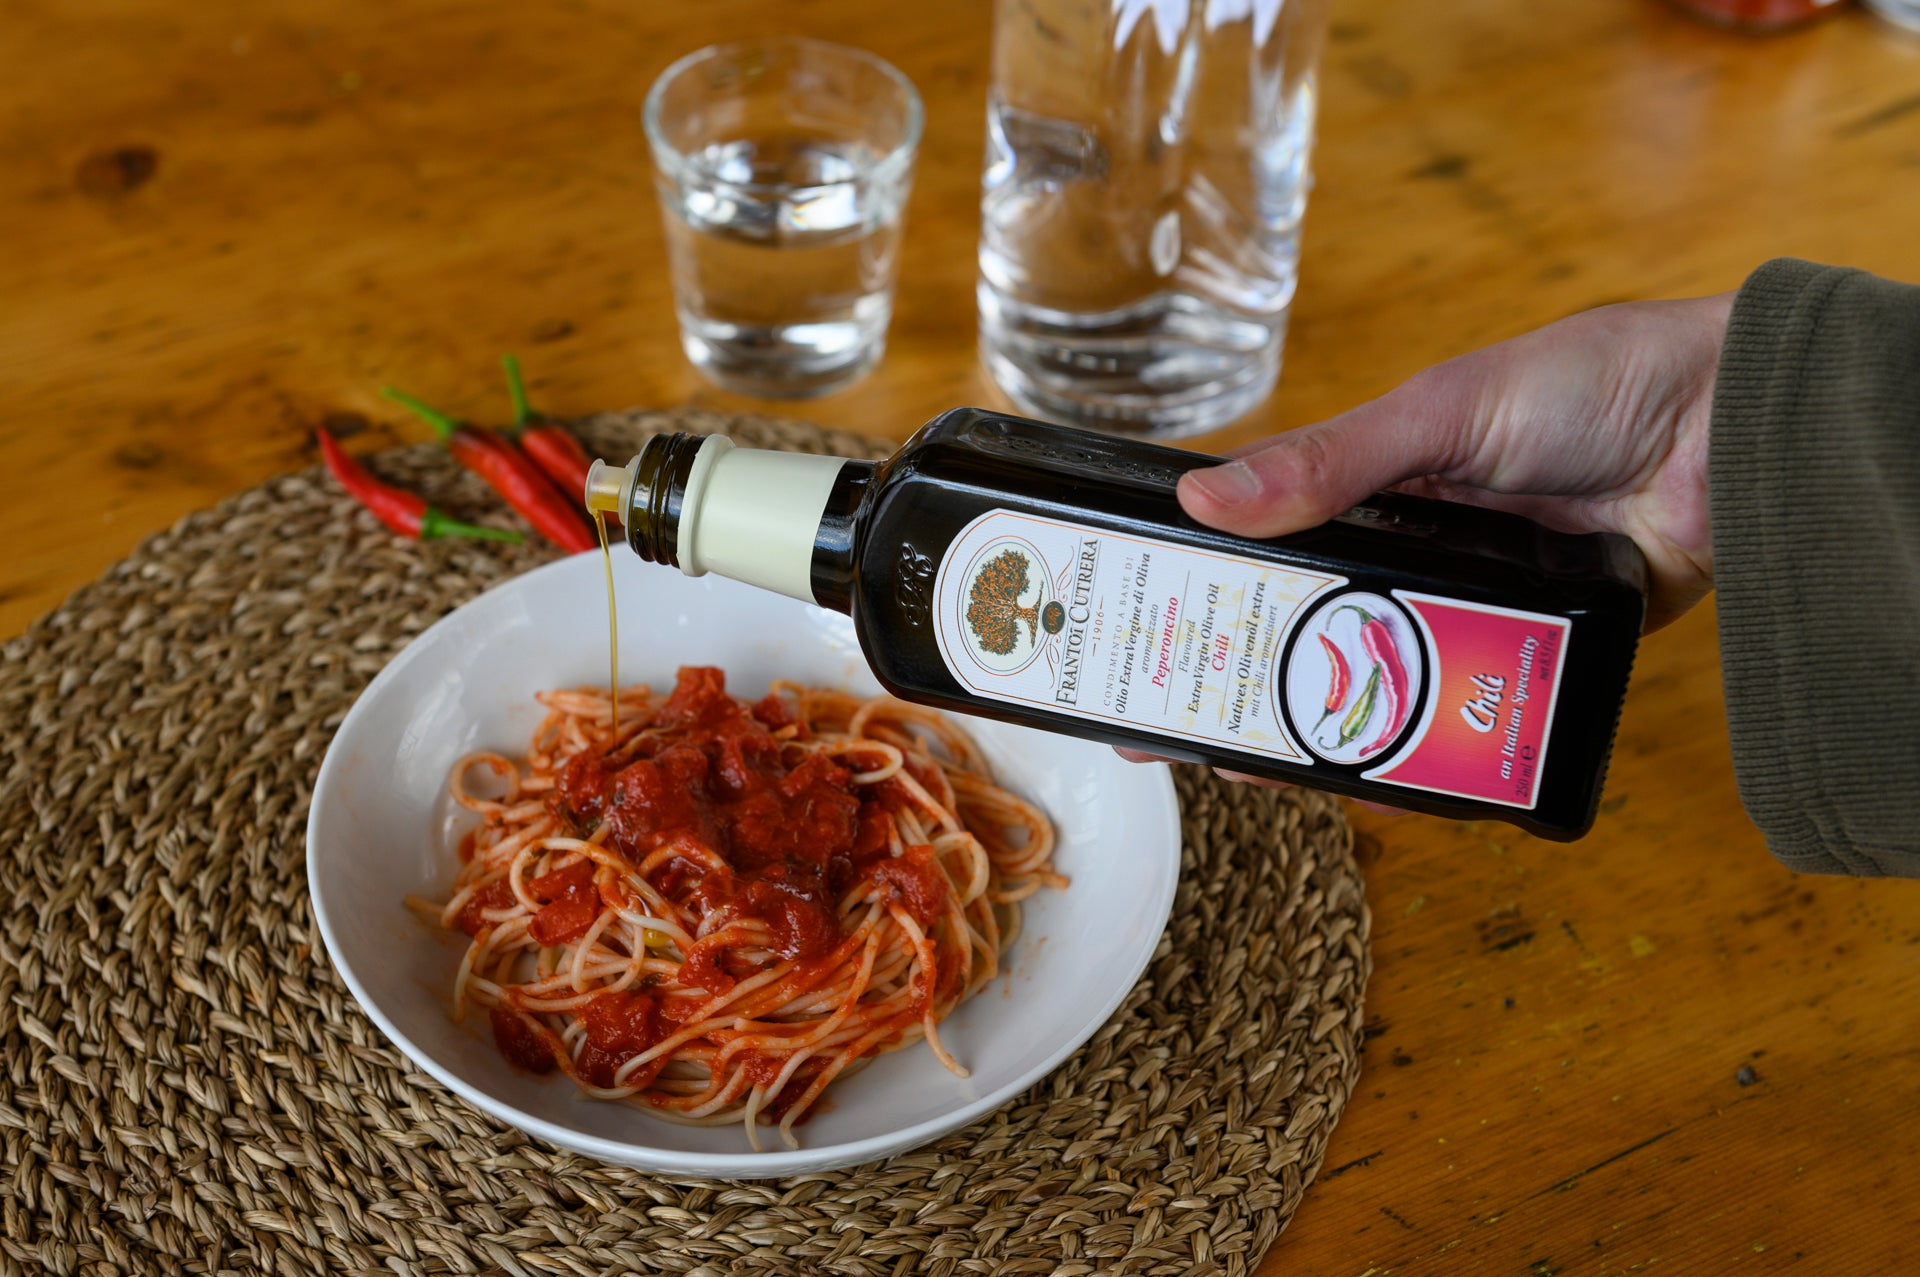 Extra virgin olive oil flavored with chilli pepper